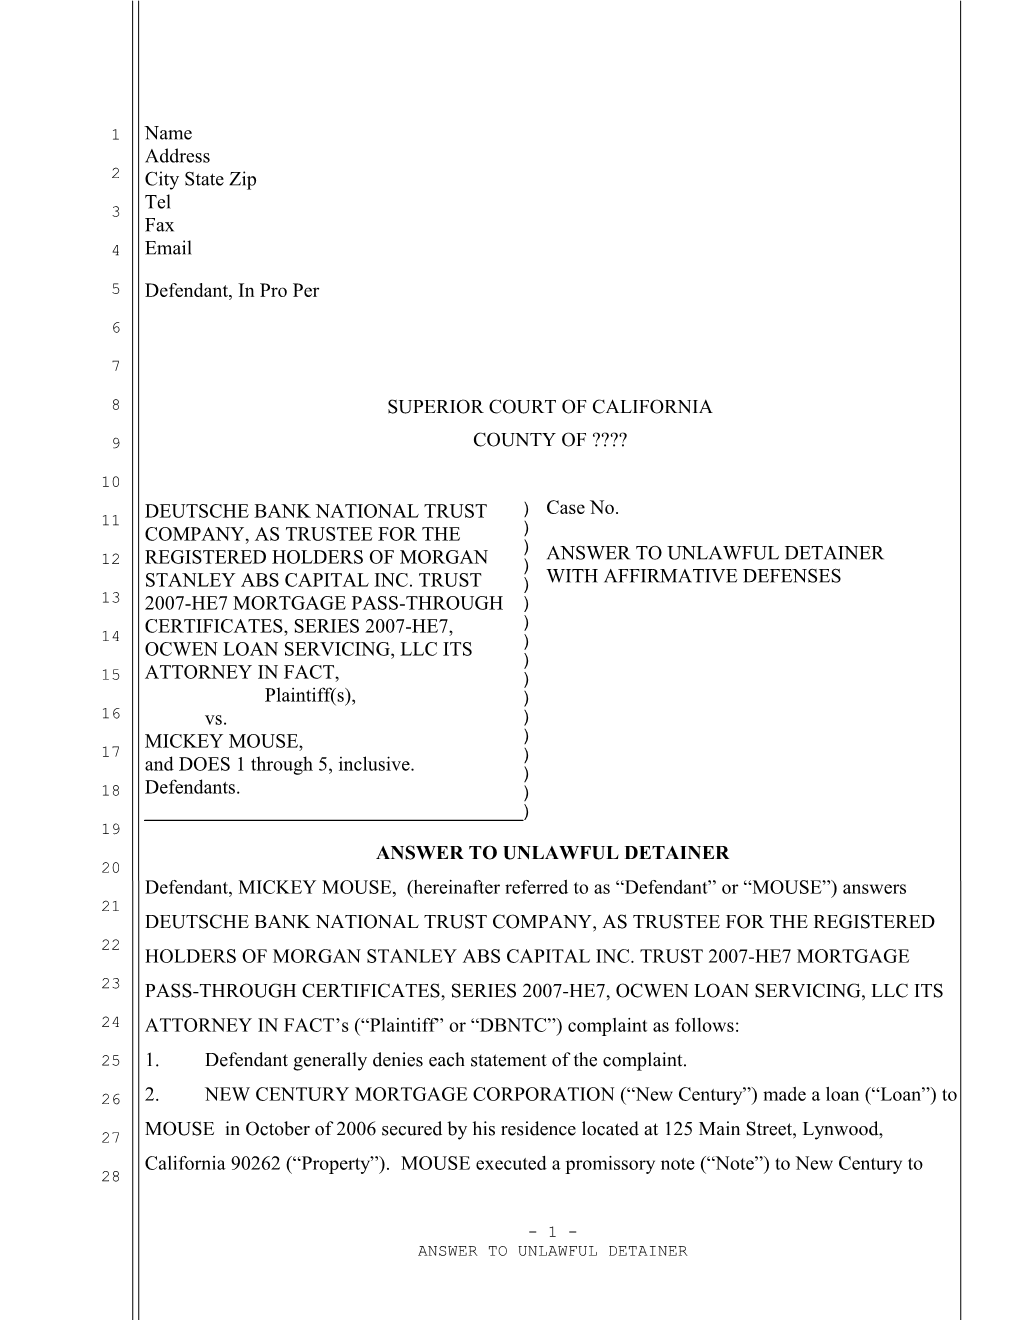 Sample Motion to Stirike Unlawful Detainer Complaint for California